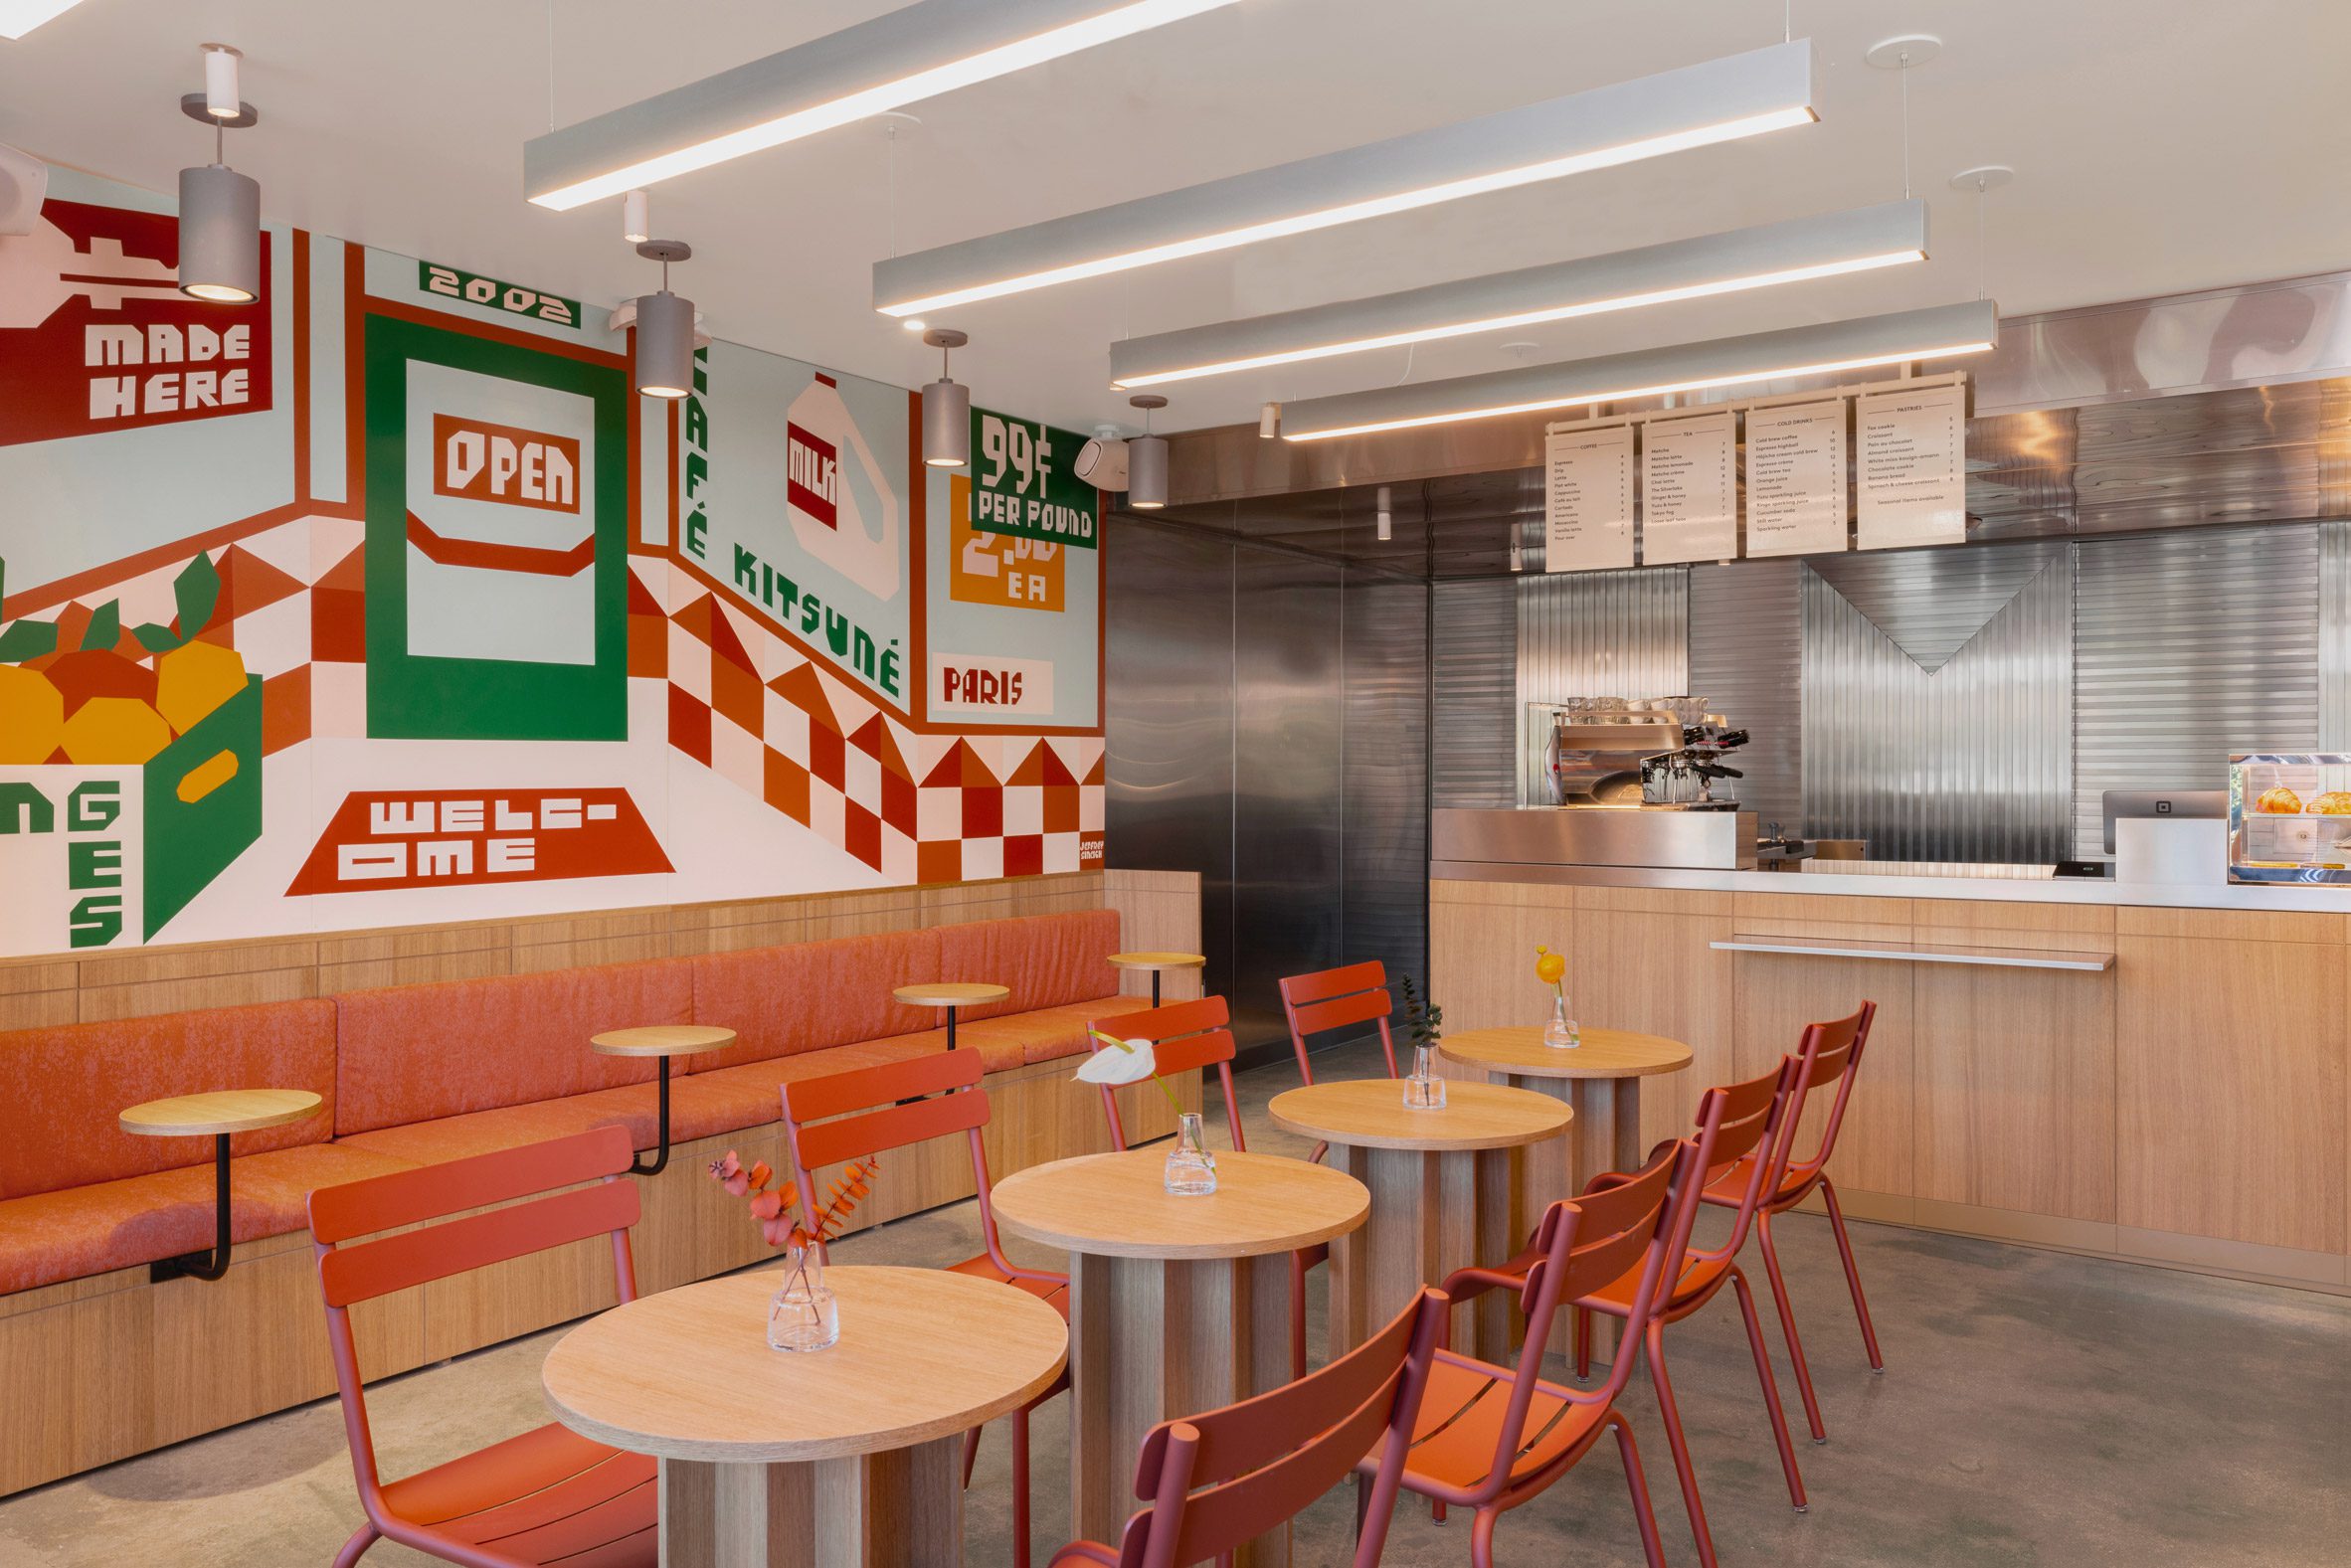 Cafe interior with white oak tables, burnt orange seats and a wall mural